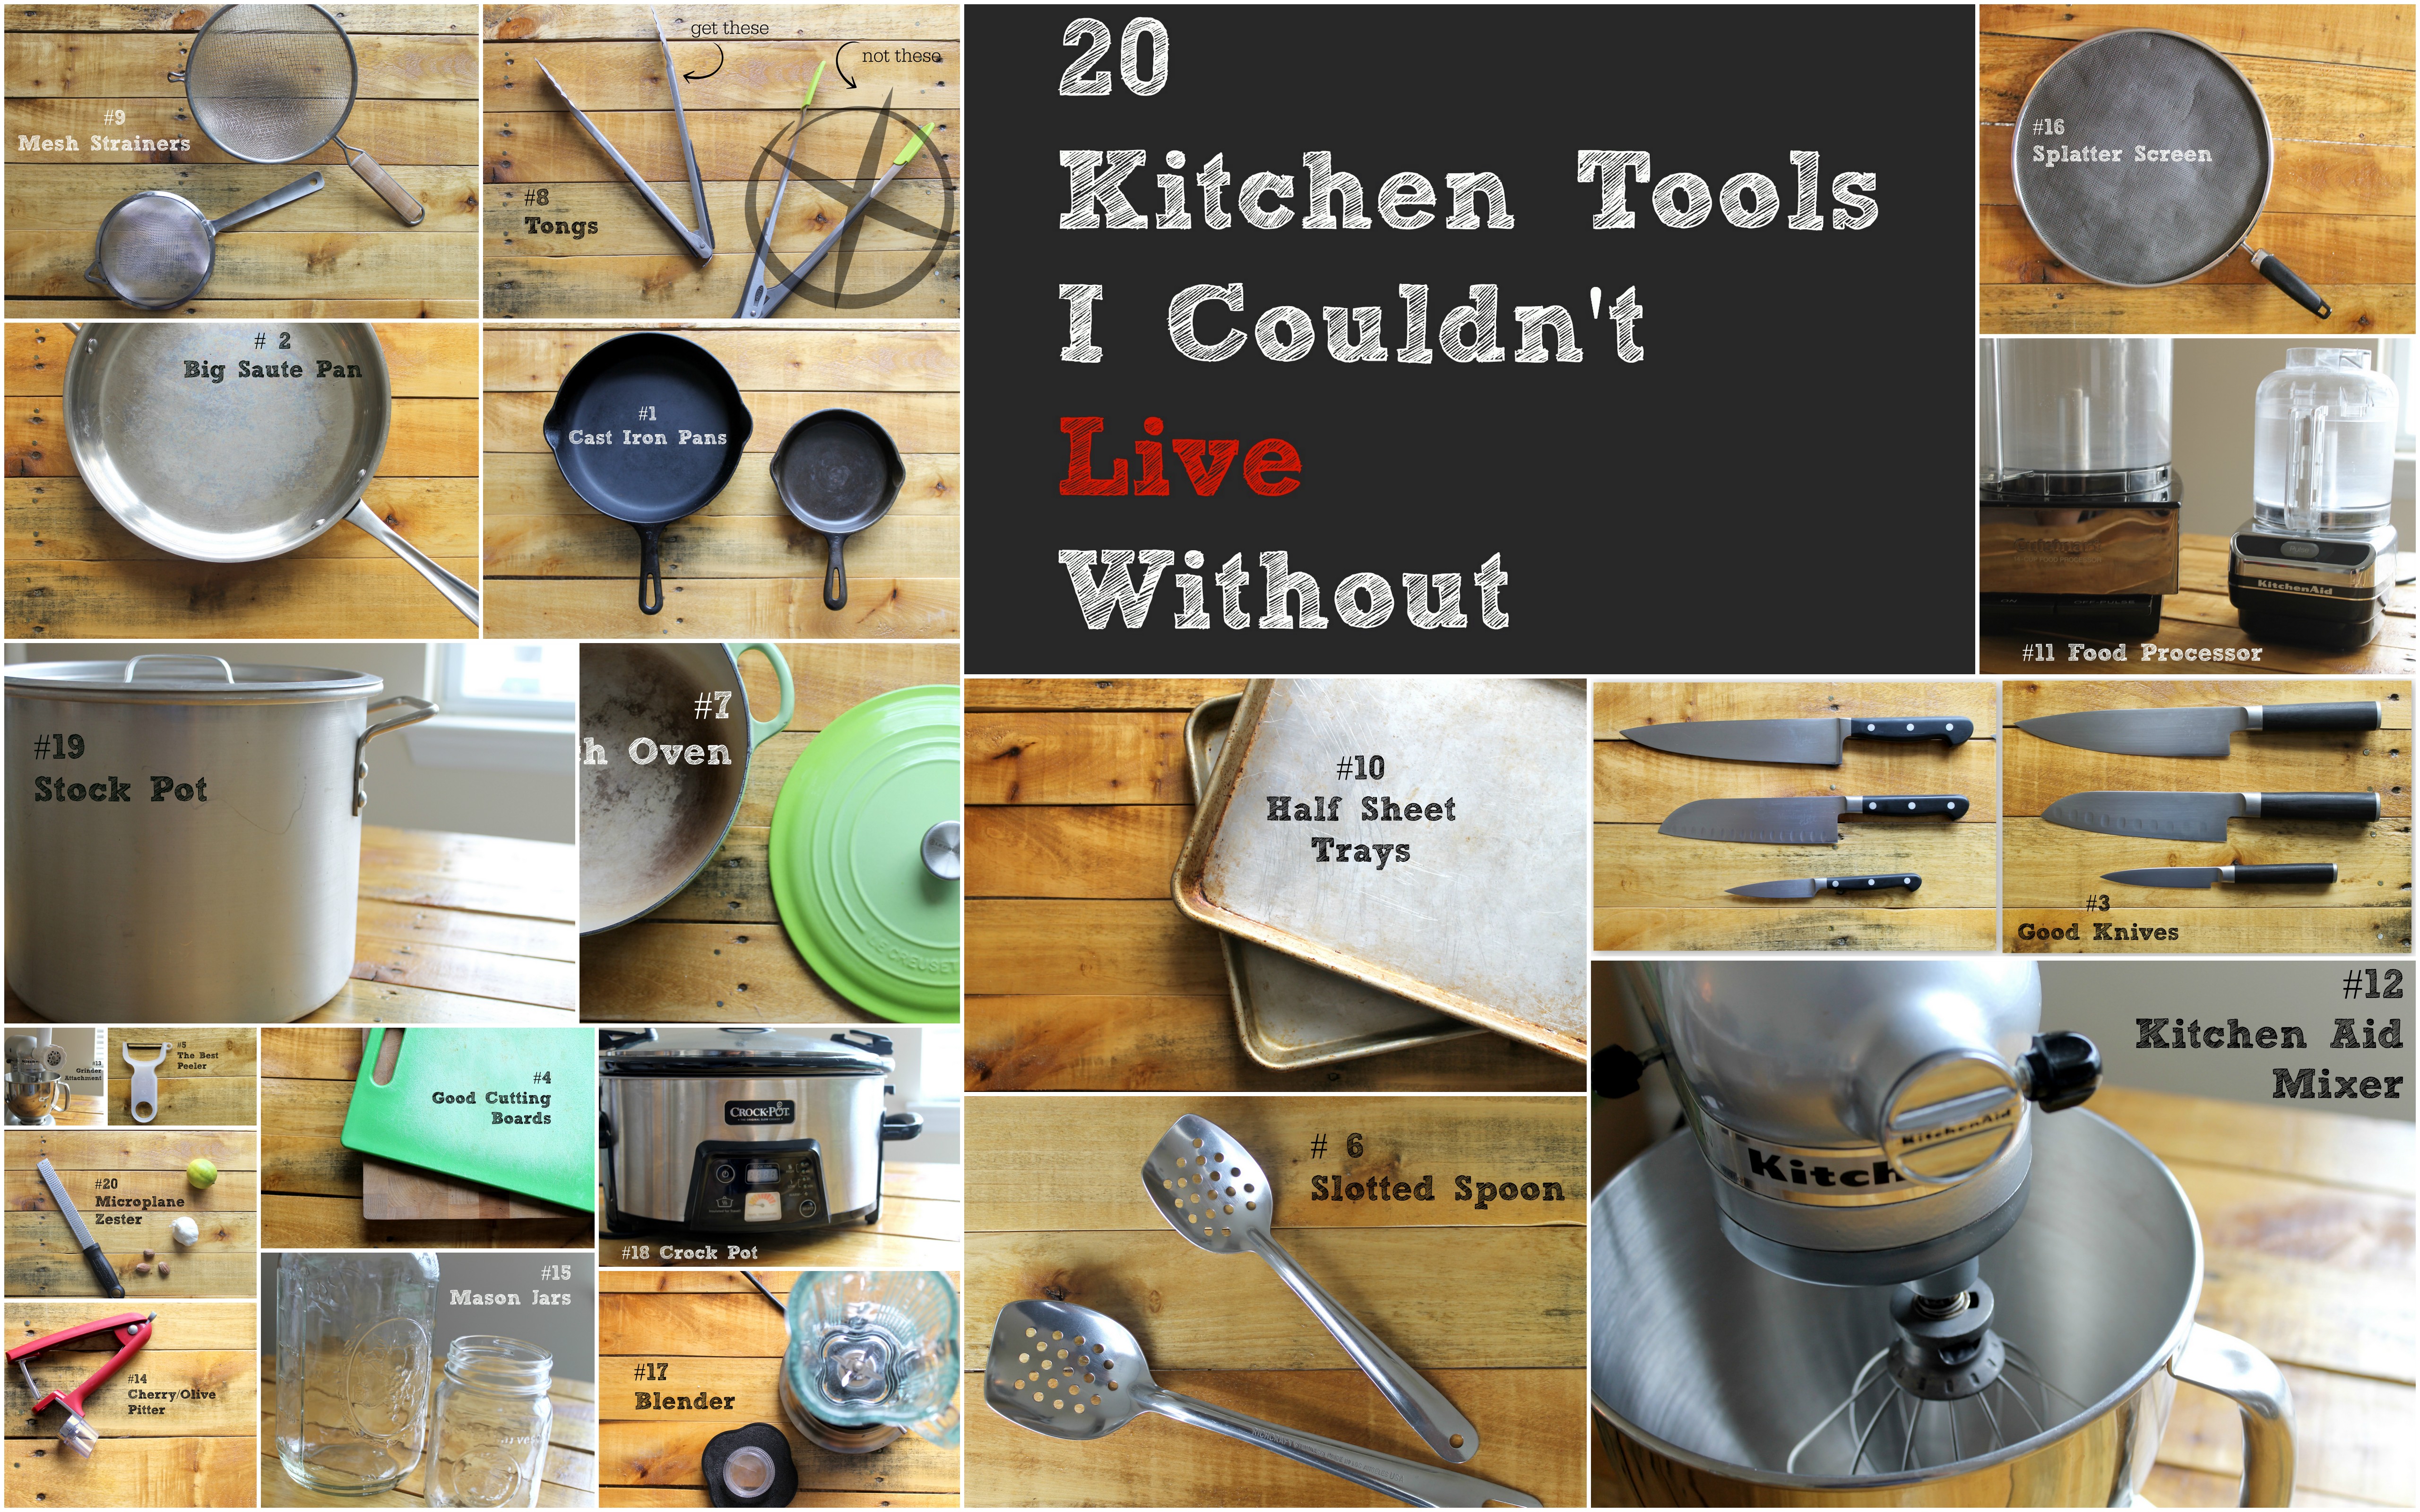 https://realeverything.com/wp-content/uploads/20-Kitchen-Tools-I-Couldnt-Live-Without.jpg